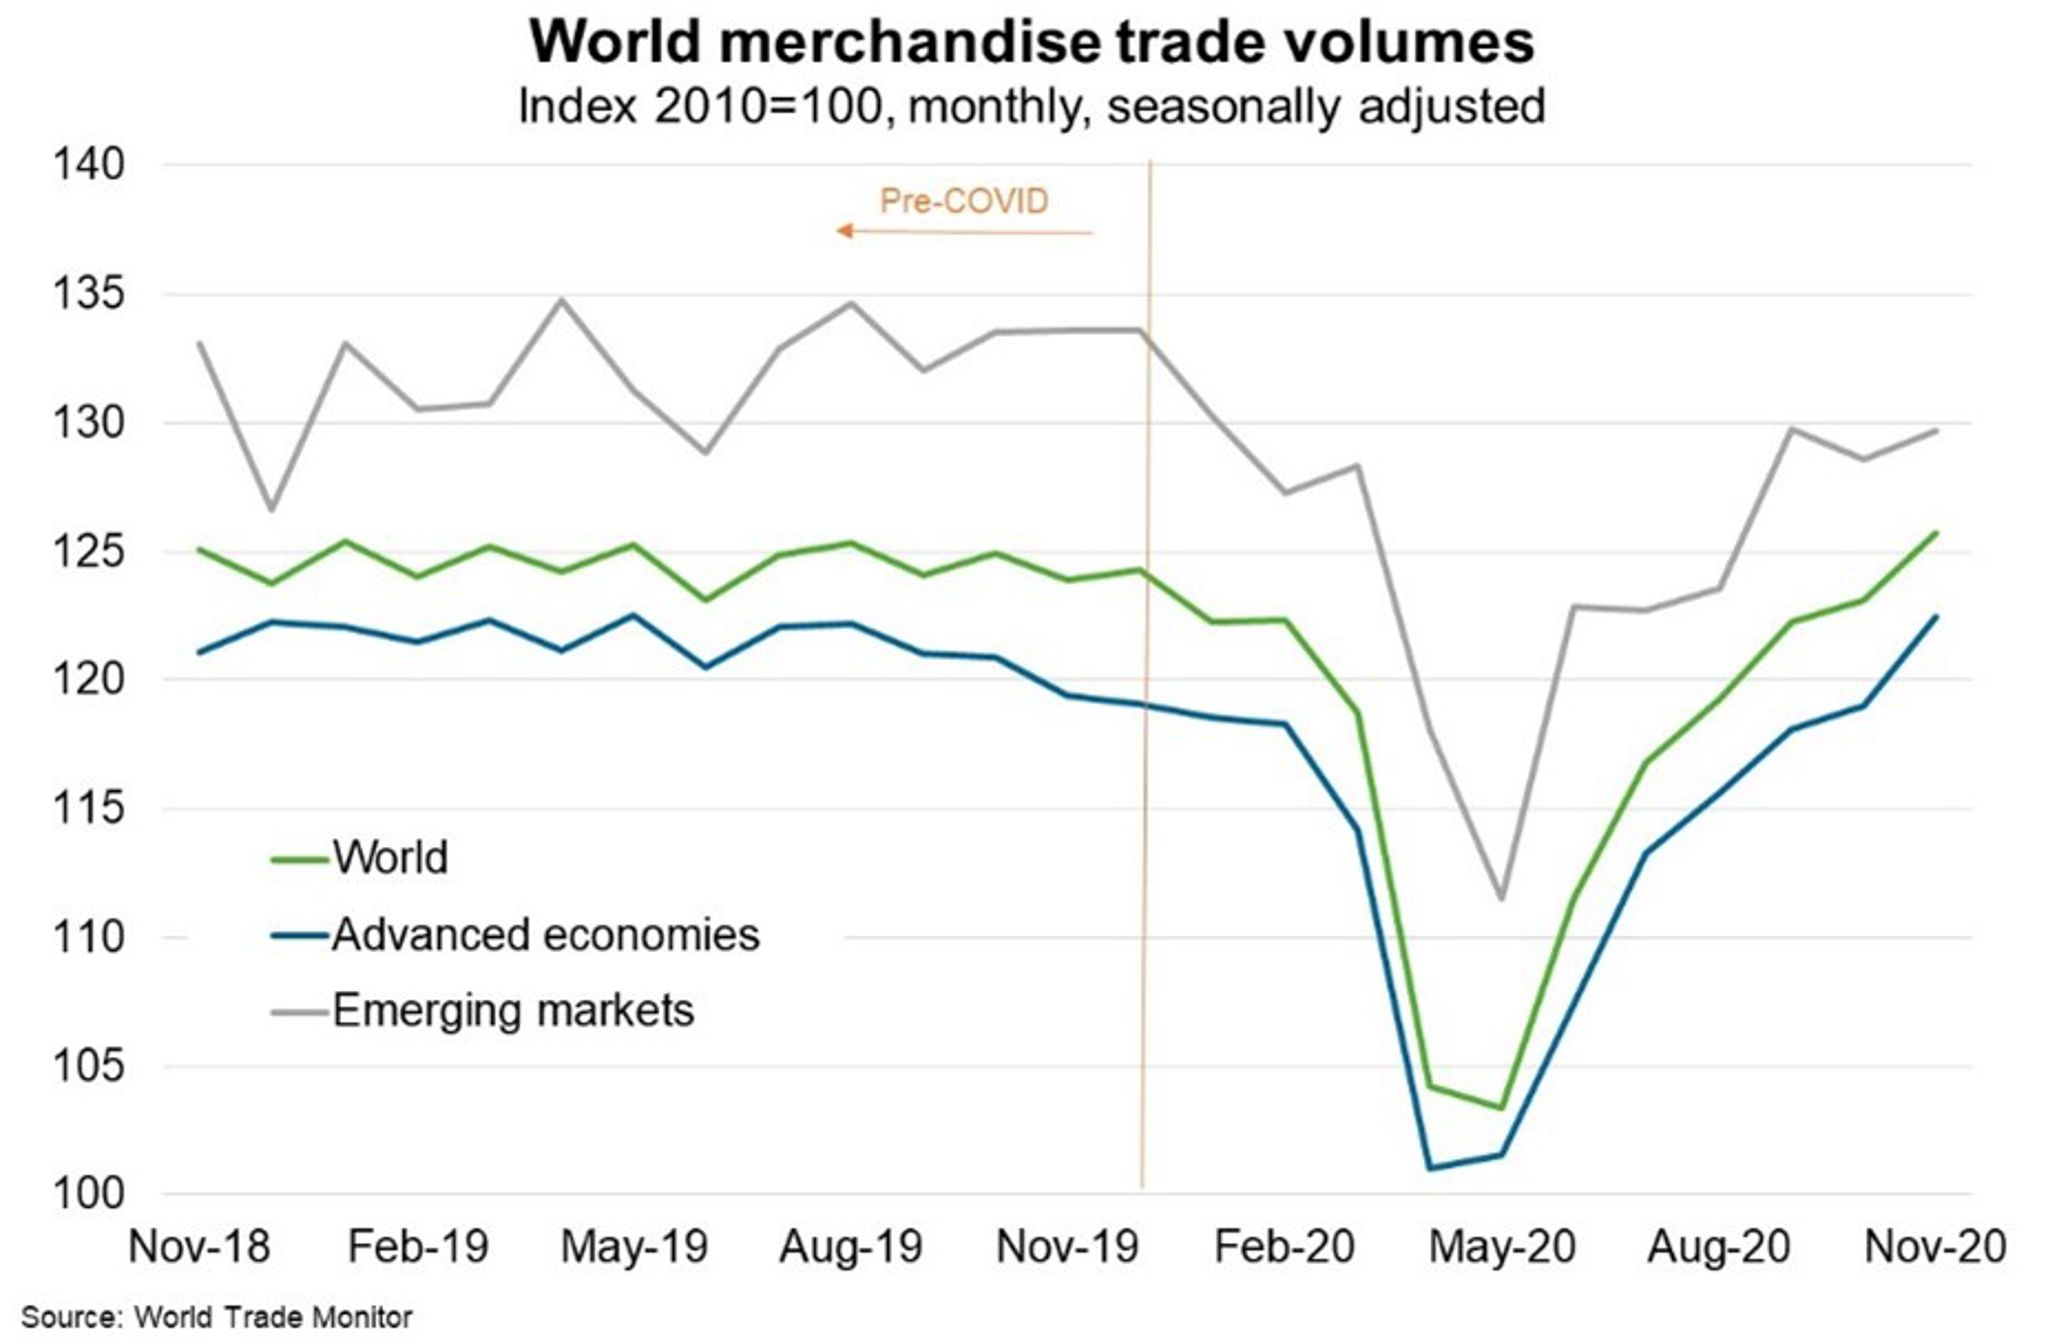 World—Trade rebound challenged by virus risks, shipping costs